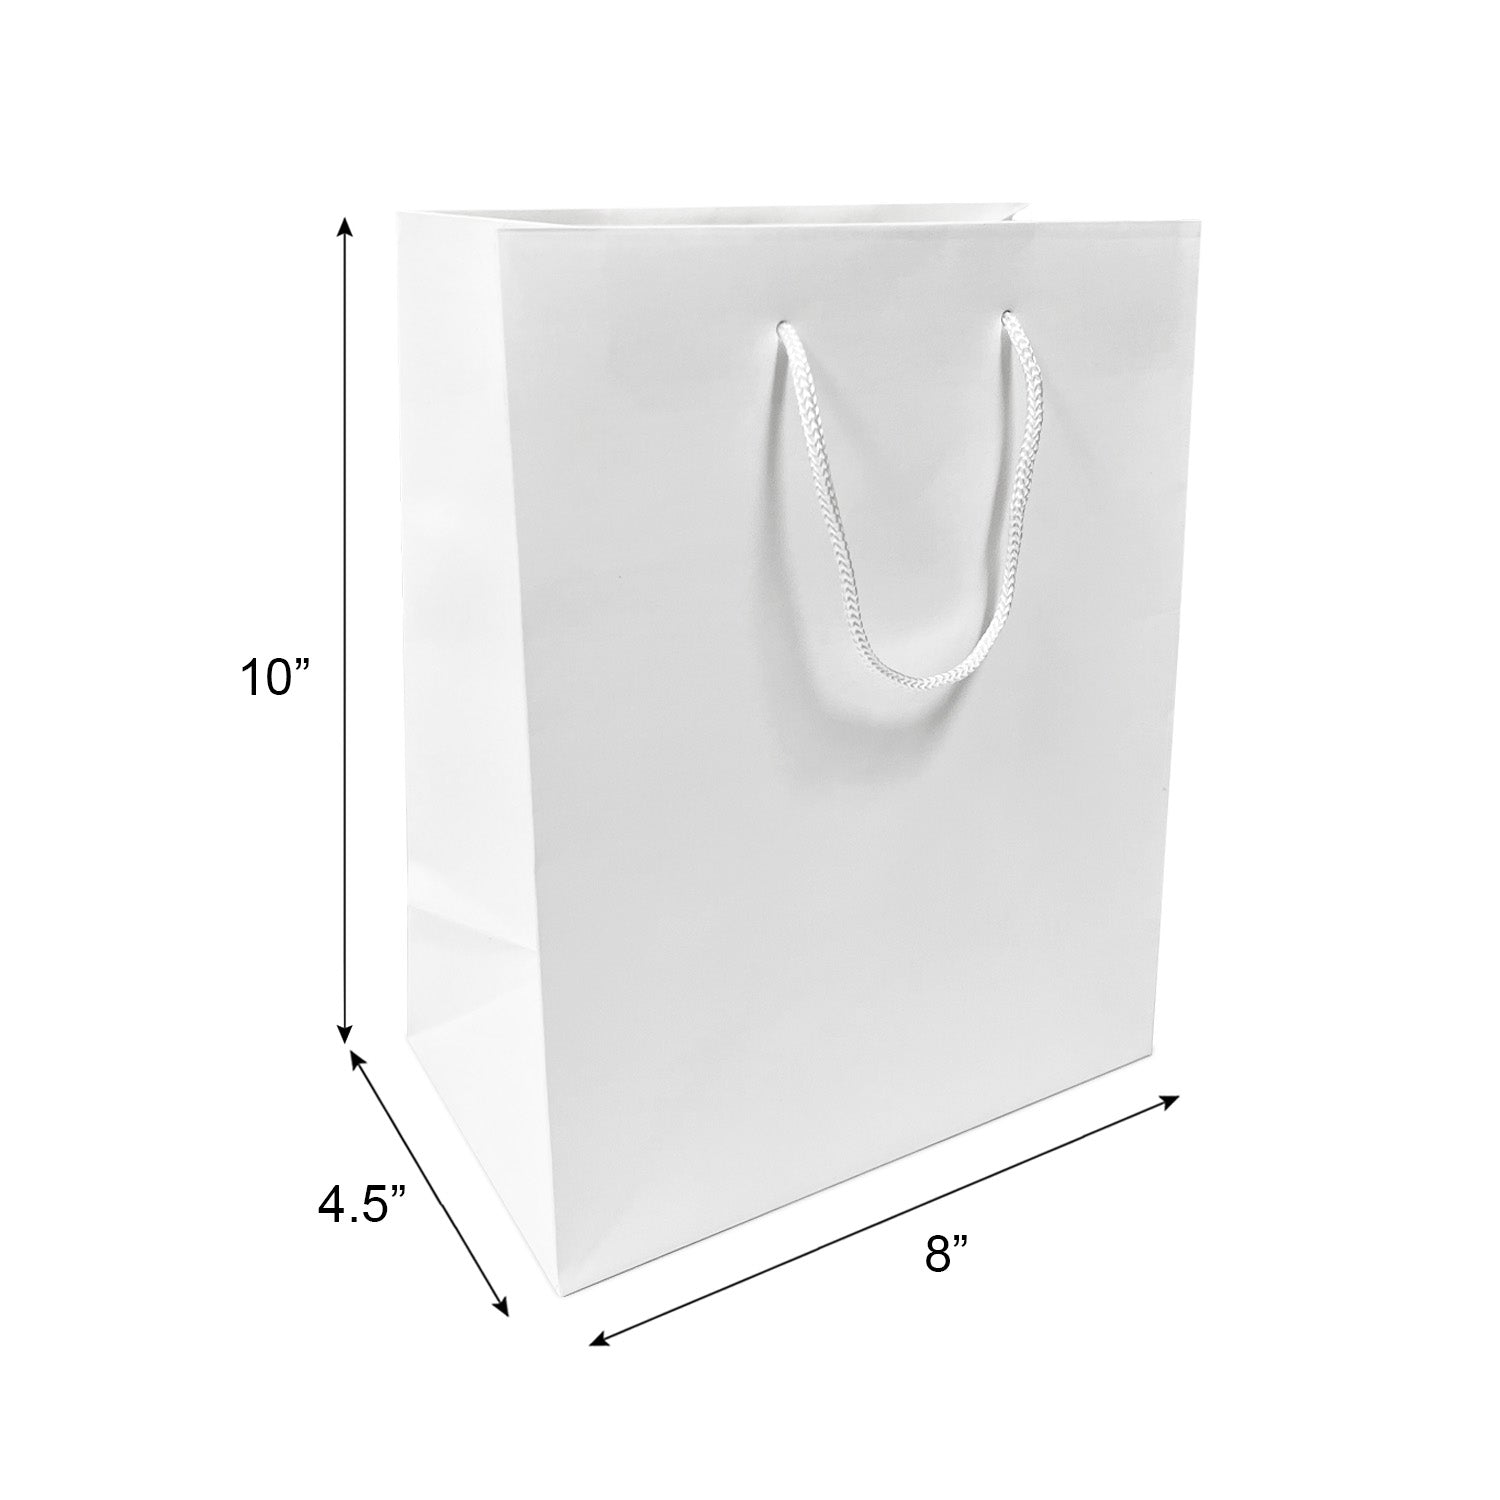 150 Pcs, Cub,  8x4.75x10.25 inches, White Euro Tote Paper Bags, with Rope Handle